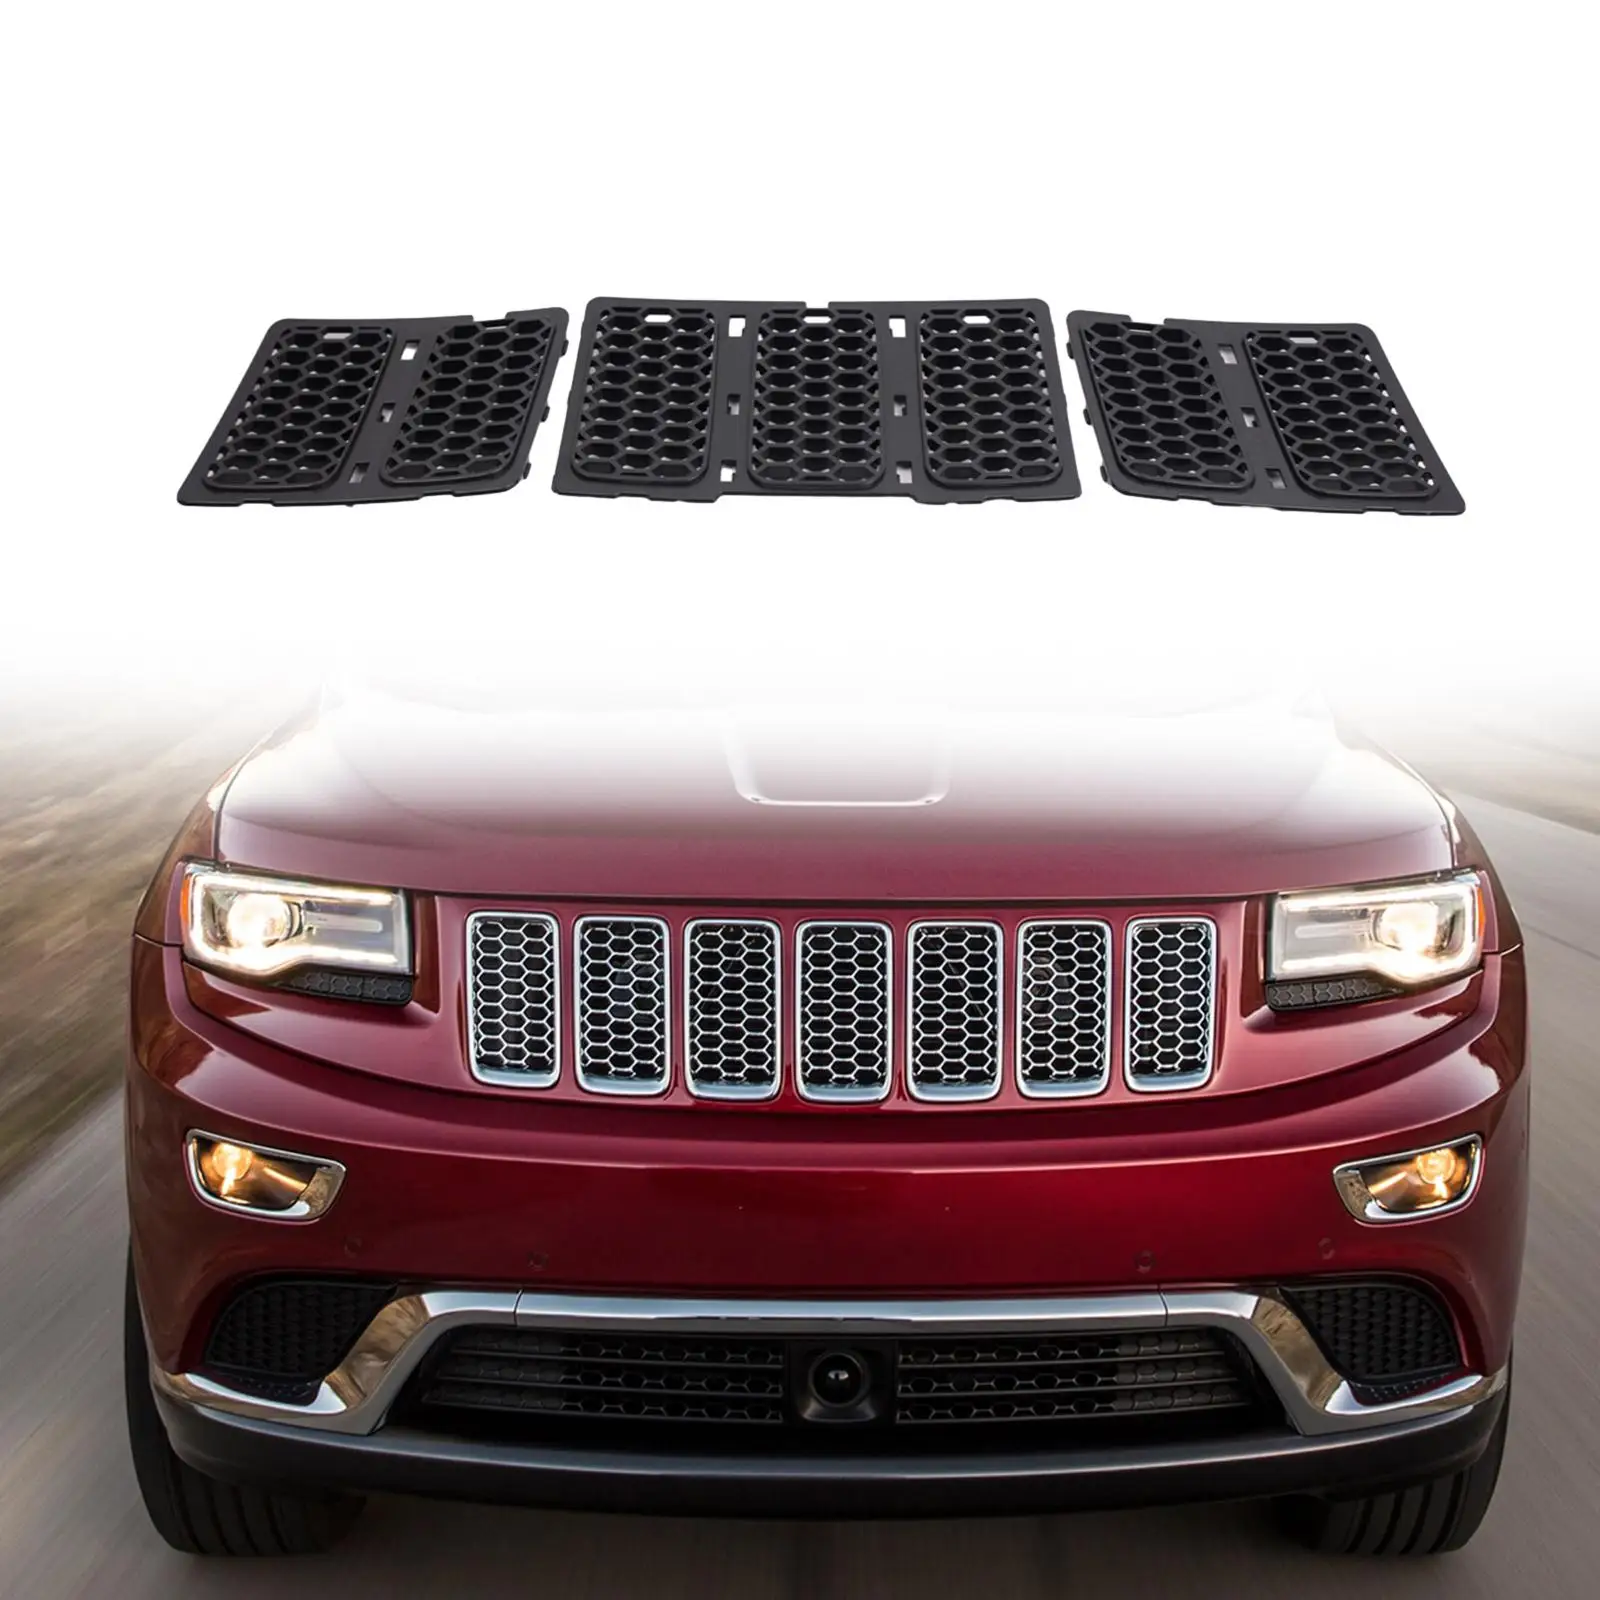 3x Honeycomb Grille Inserts Mesh Grill Durable for Jeep Grand Cherokee